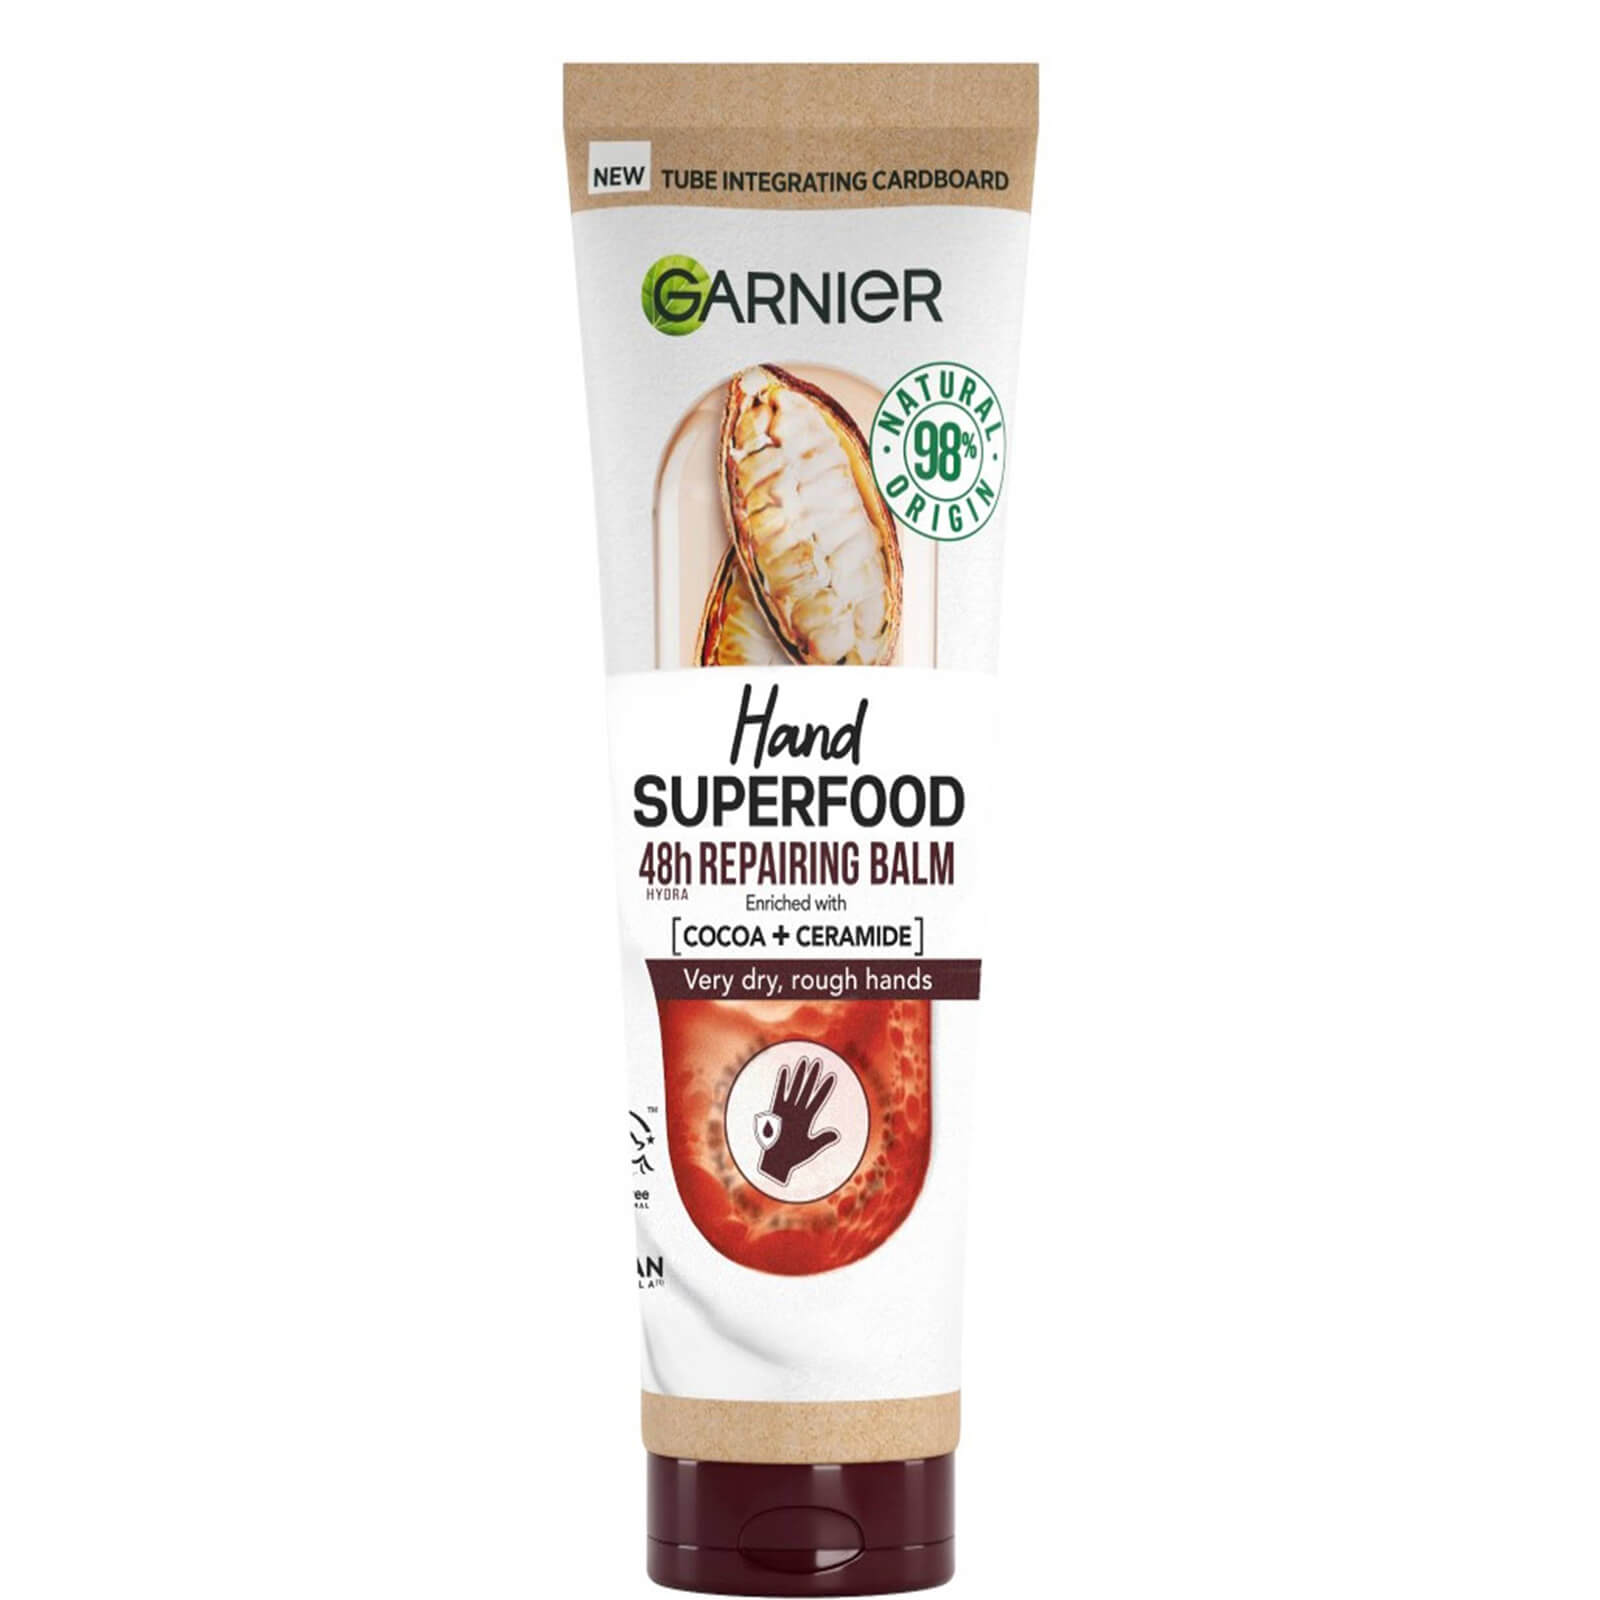 Image of Garnier Vegan Hand Superfood, Repairing Hand Cream with Cocoa and Ceramide for Very Dry, Rough Hands 75ml